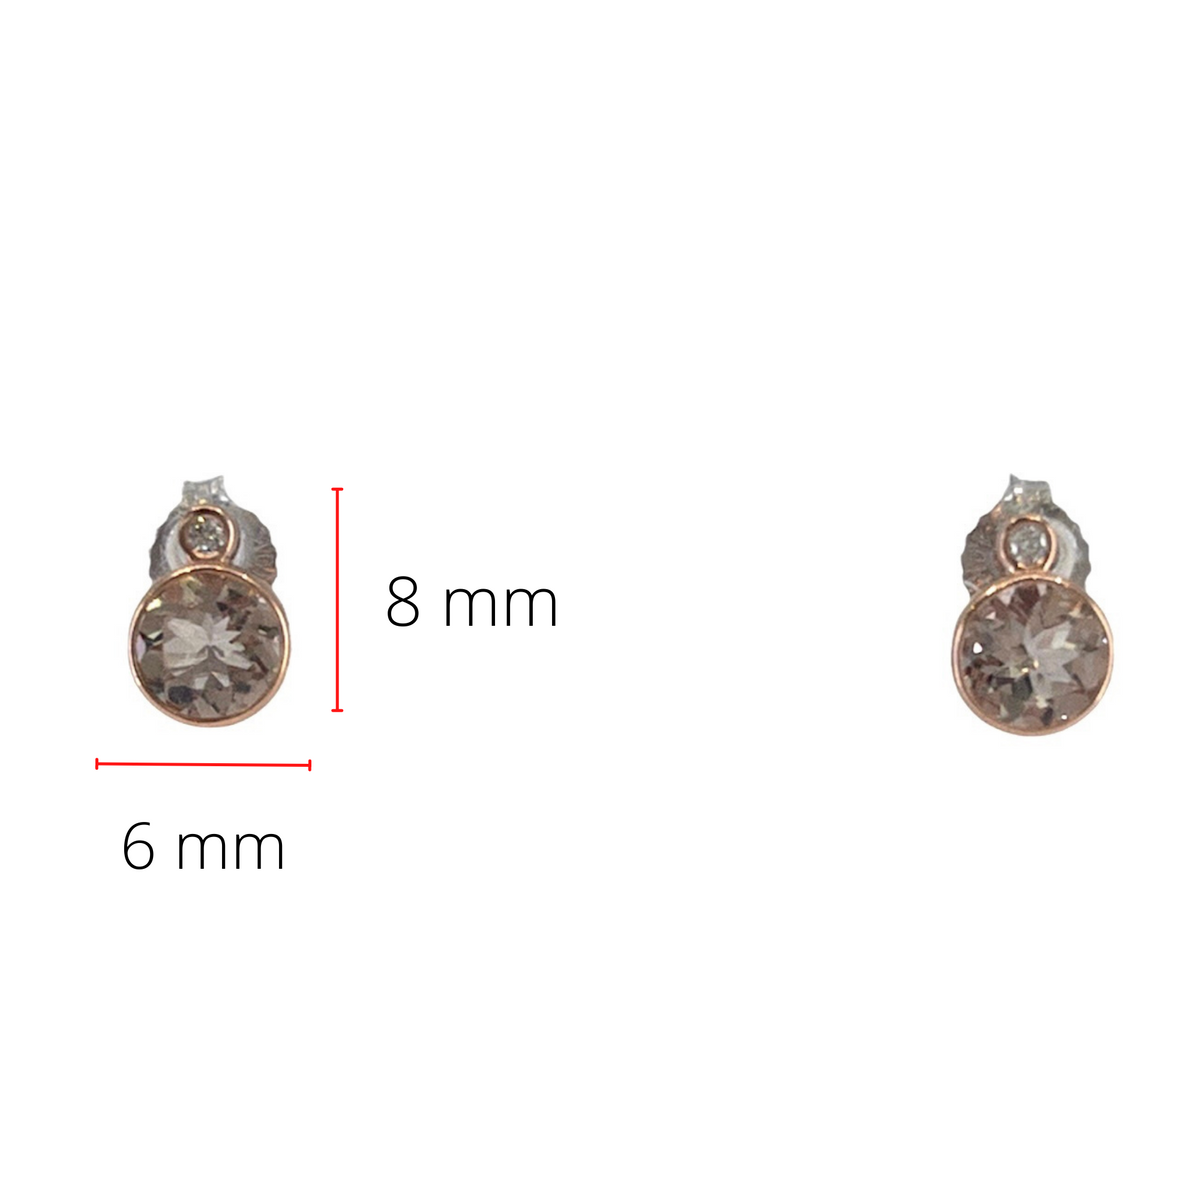 10K Two Tone Rose and White Gold 5mm Morganite and 0.02cttw Diamond Stud Earrings.